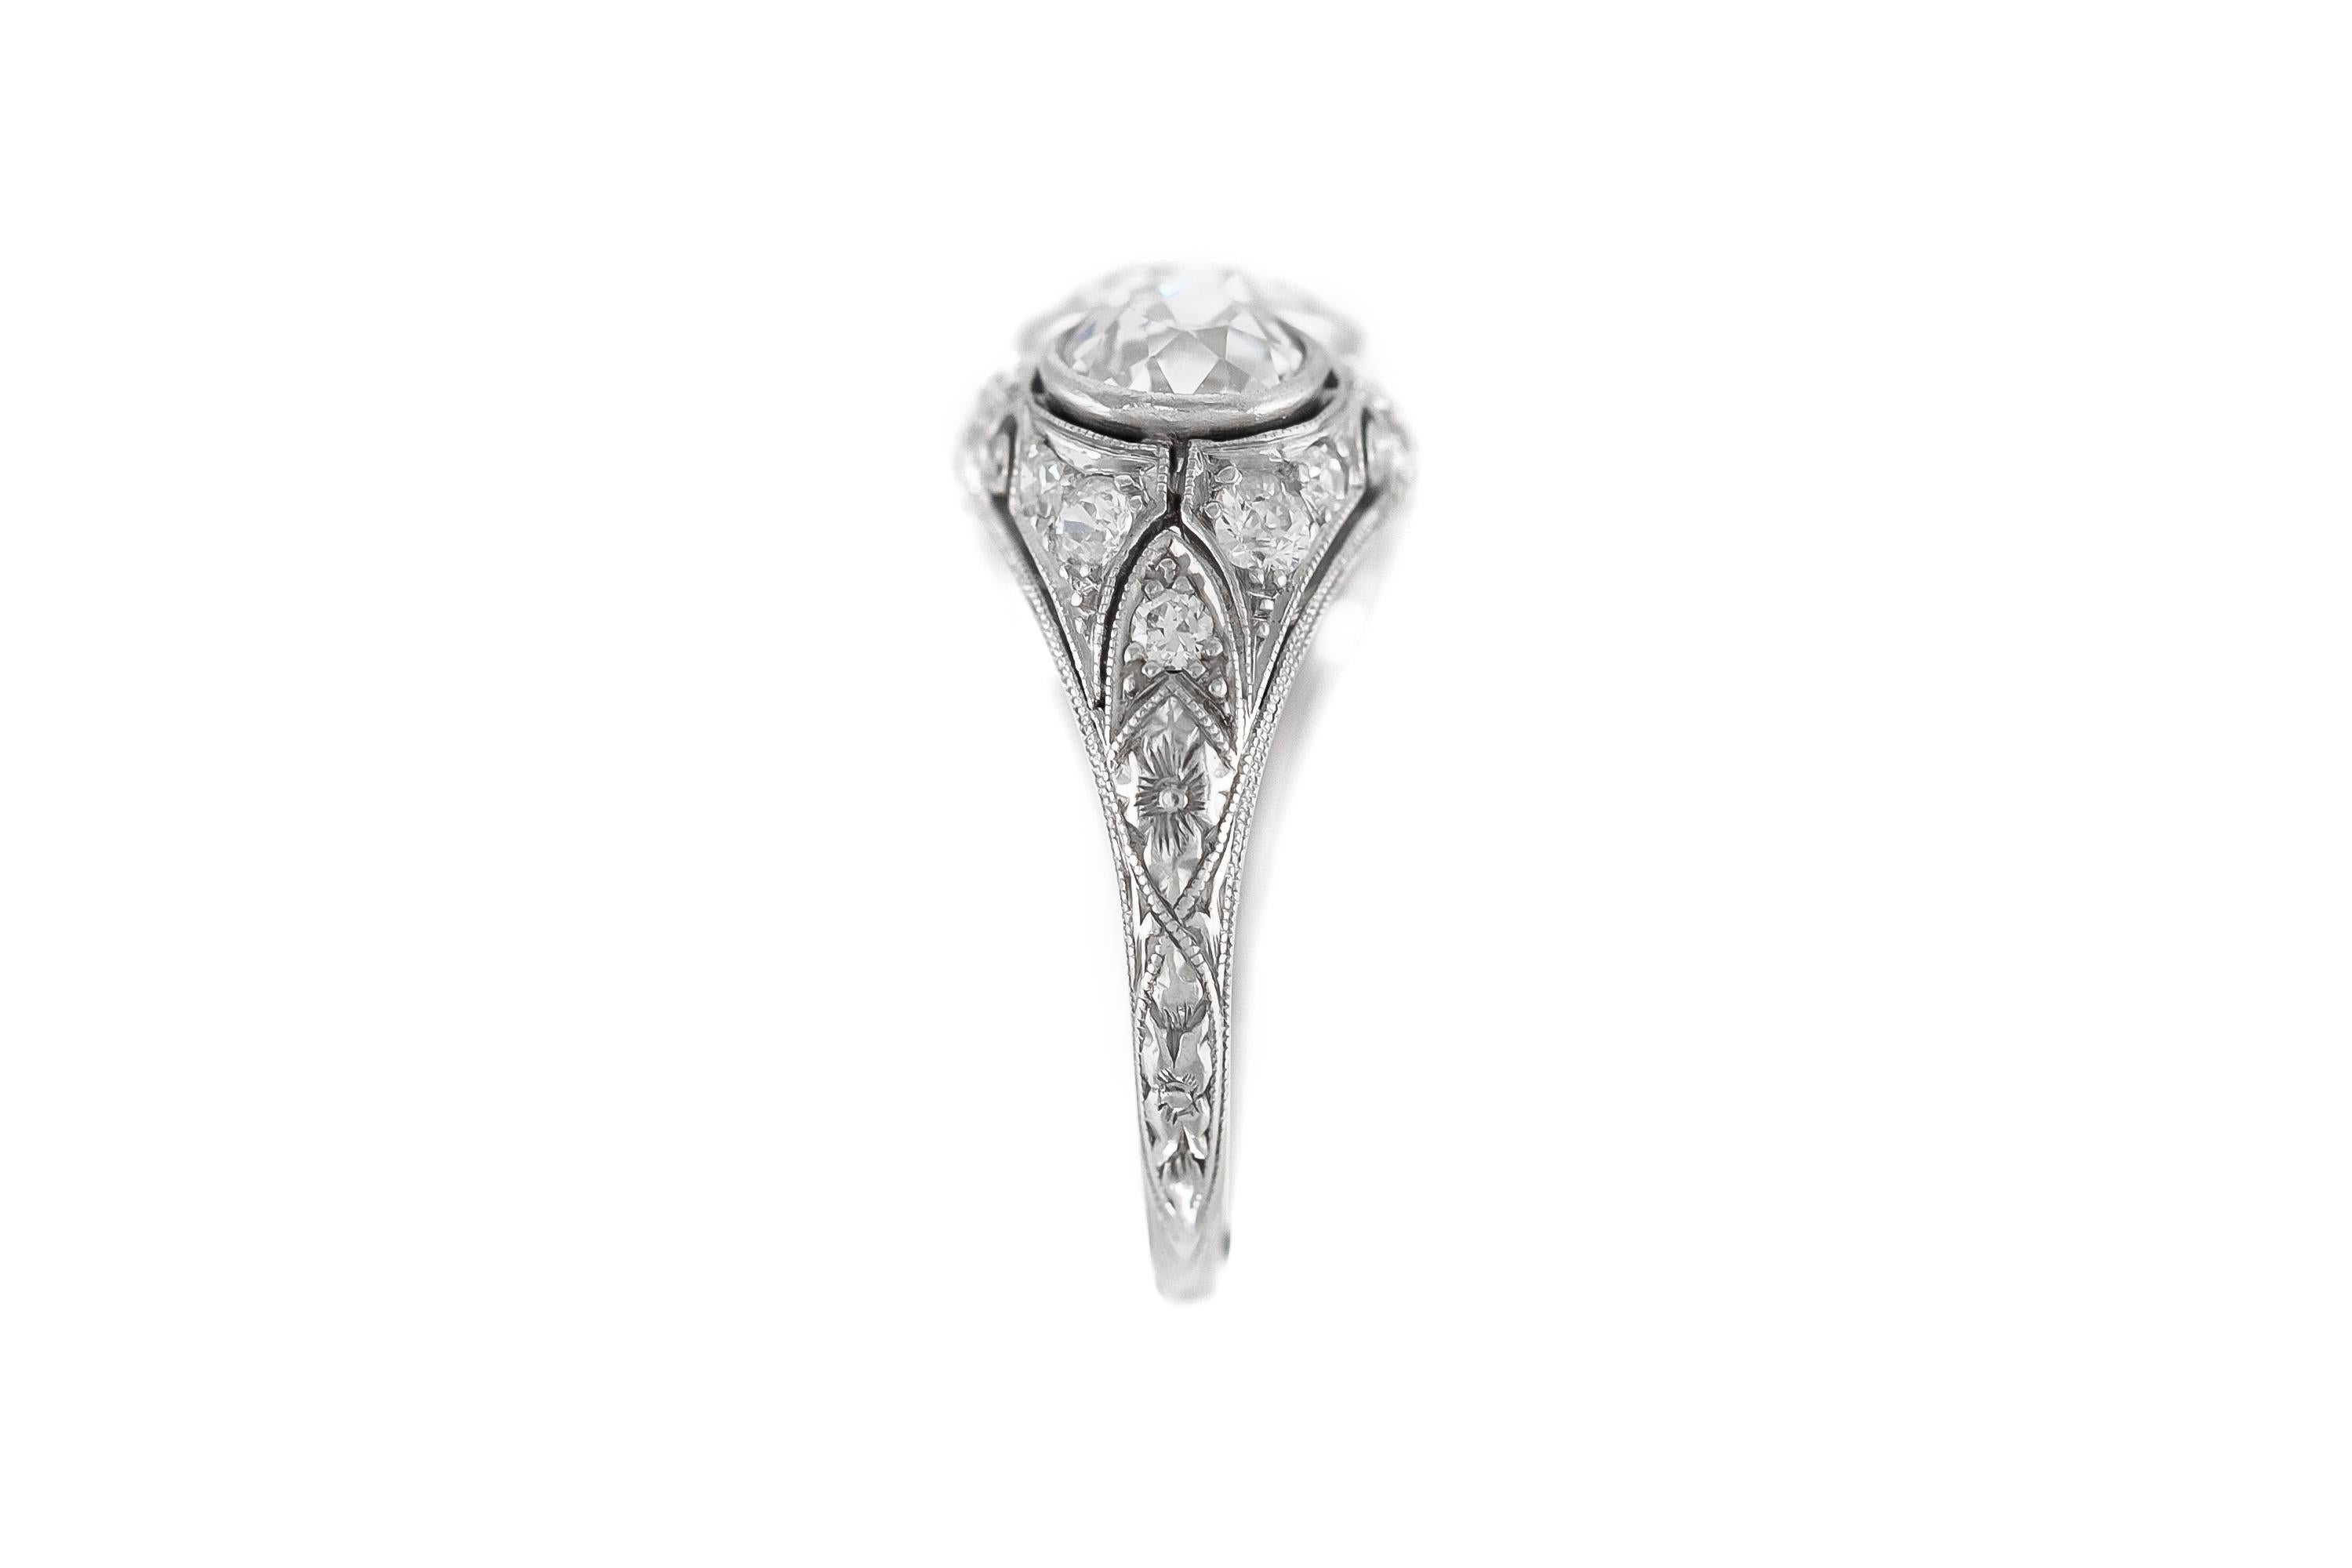 Finely crafted in a platinum setting with filigree.
The center diamond weighs approximately 1.70 carats and the two side diamonds weigh approximately a total of 1.60 carats.
The setting features diamonds.